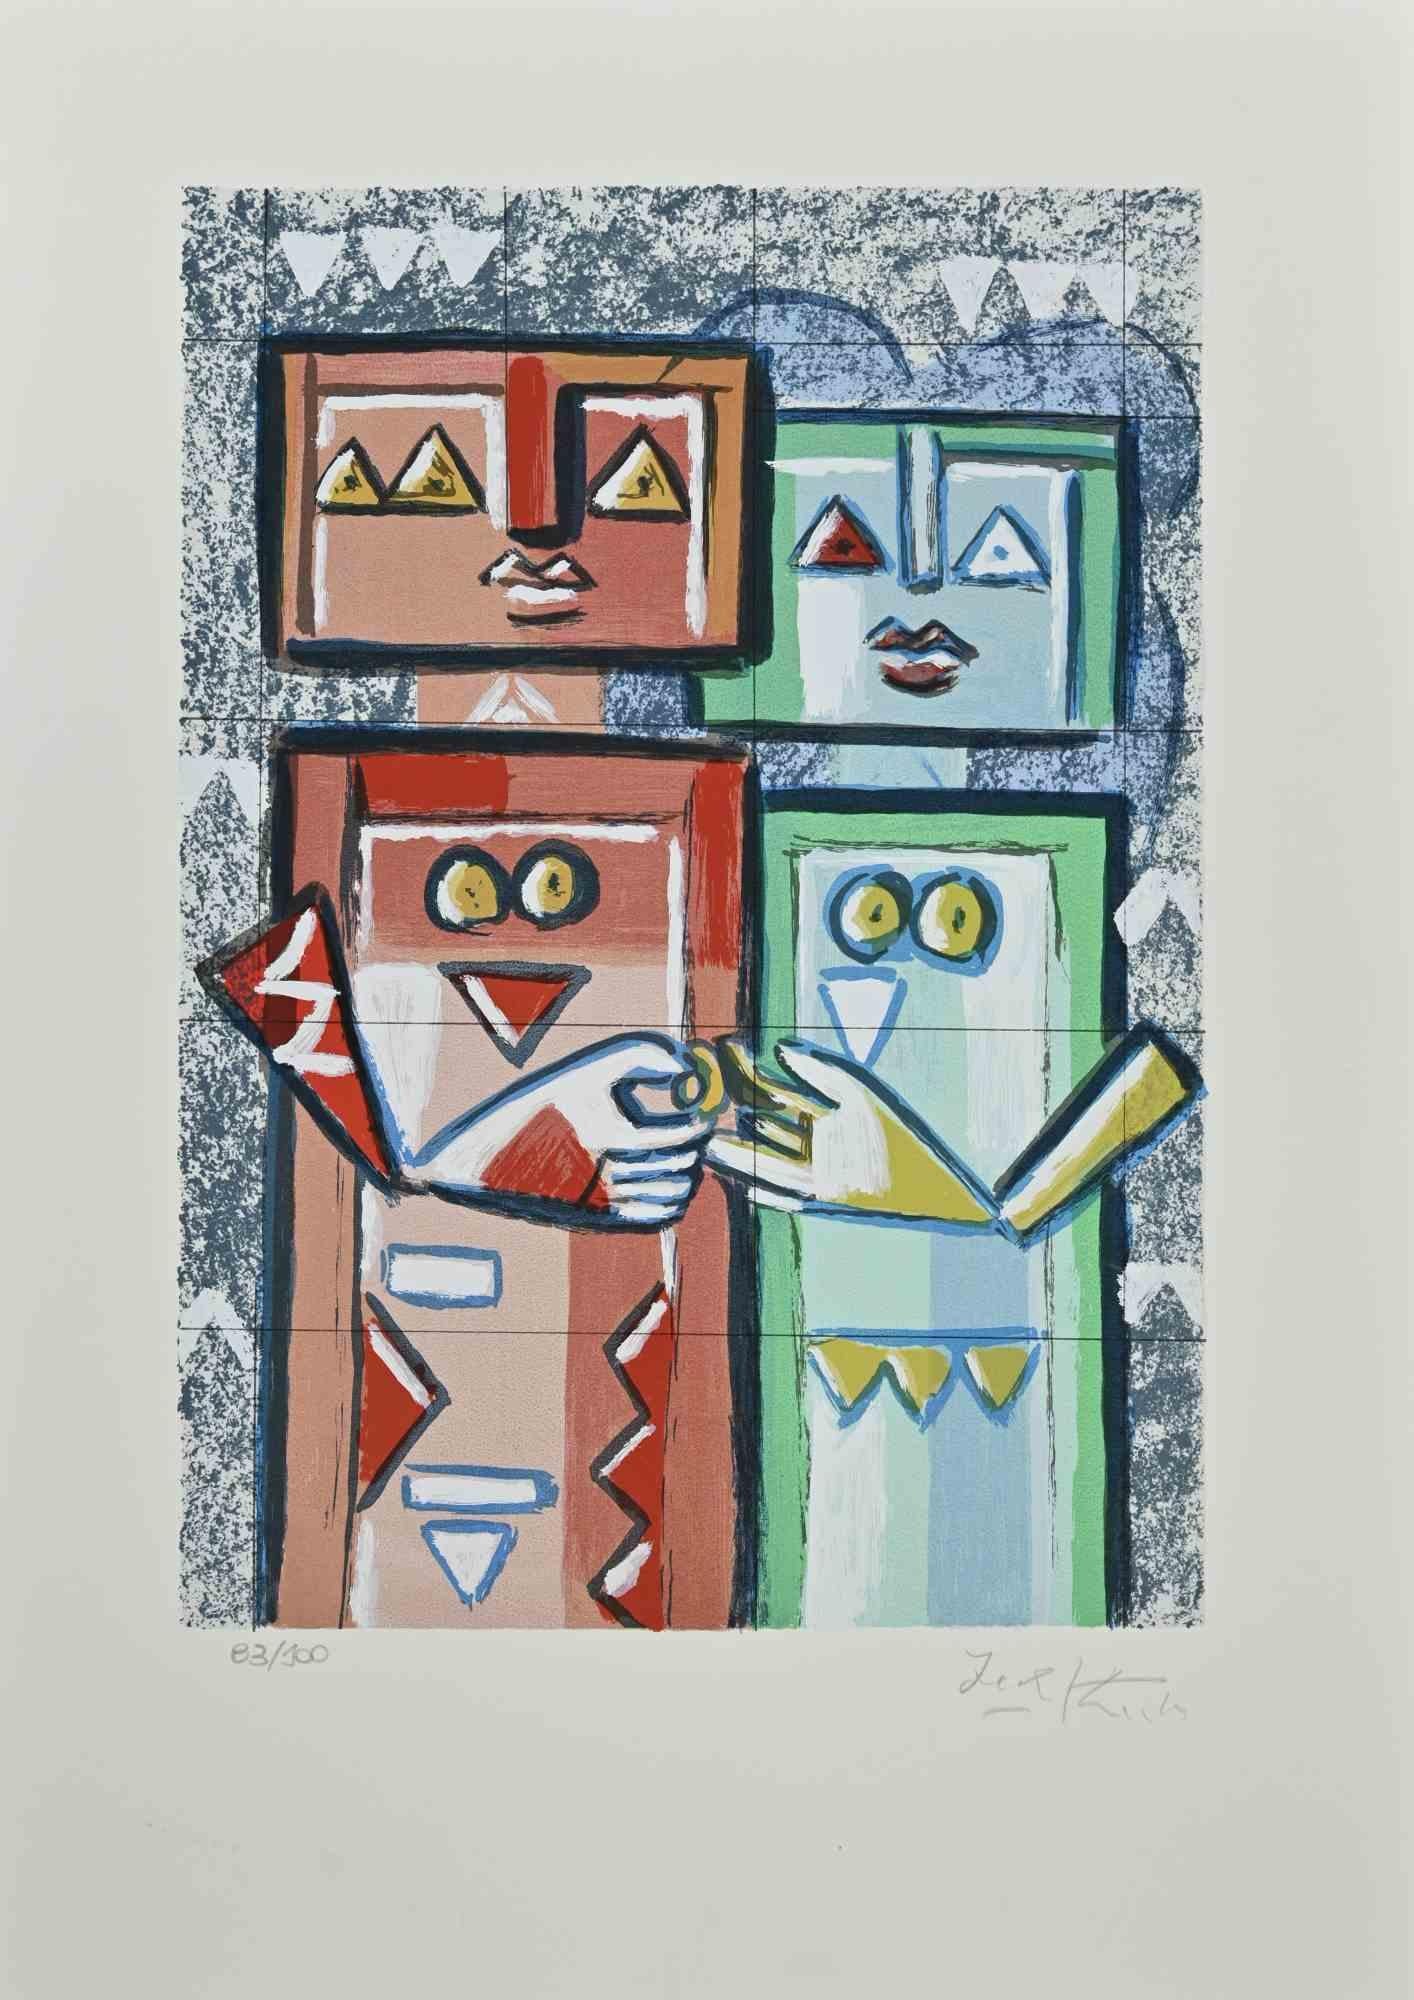 Couple is a lithograph realized by Ibrahim Kodra in 1980s.

Very good condition on a white cardboard.

Hand signed with pencil by the artist on the lower right corner.

Numbered, 83/100.

Ibrahim Likmetaj Kodra (22 April 1918 – 7 February 2006) was